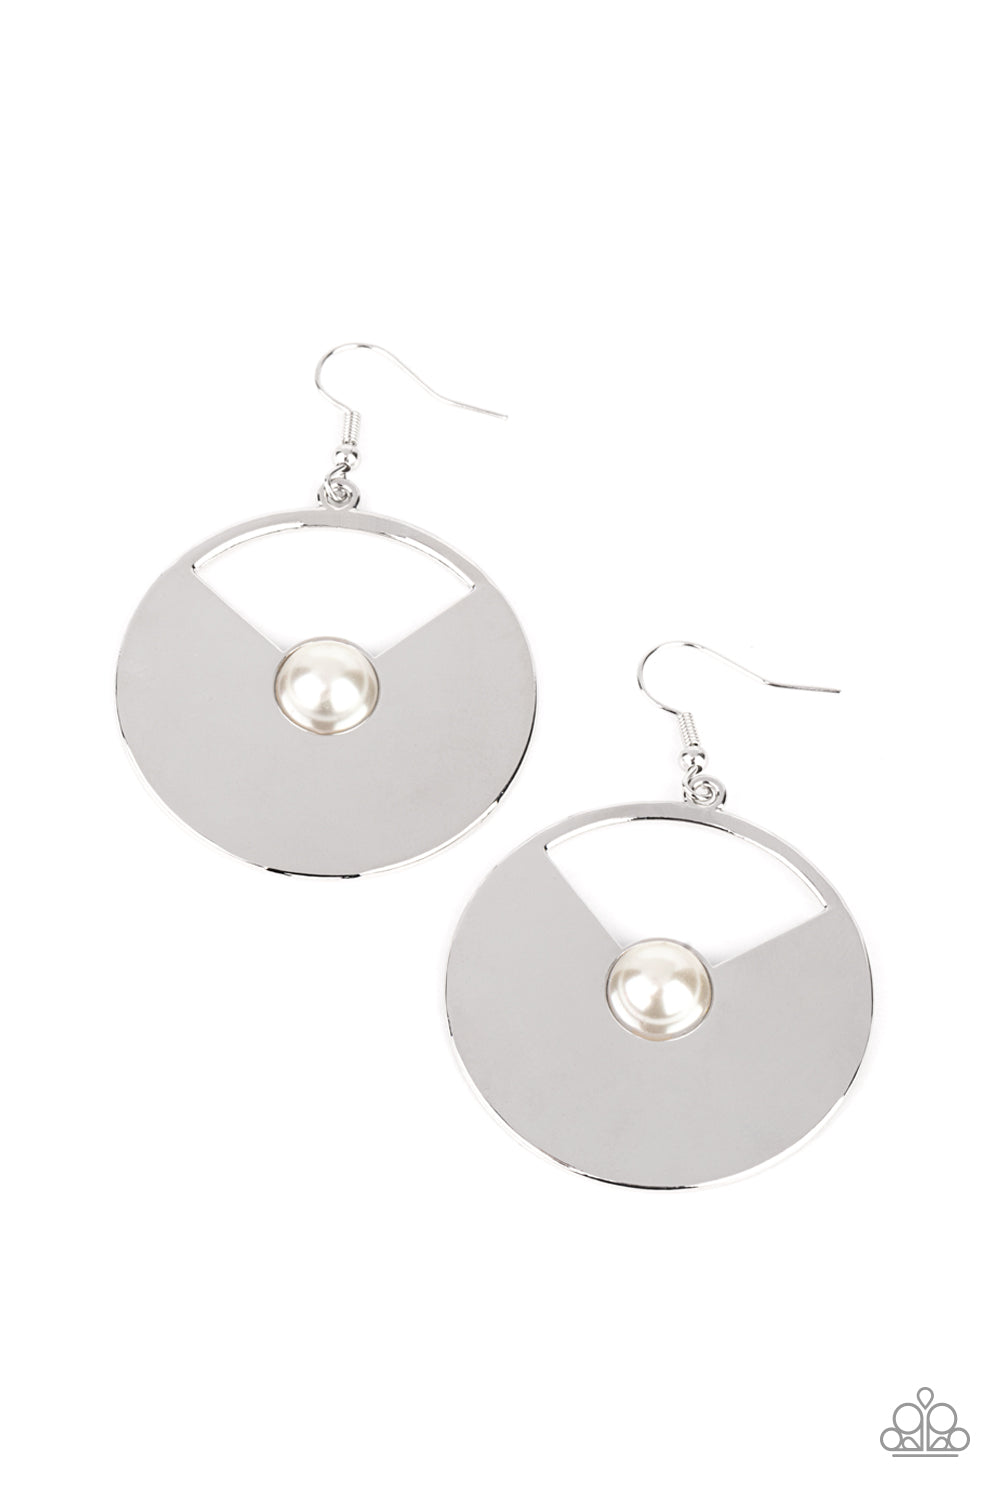 Record-Breaking Brilliance - White Earrings - Princess Glam Shop